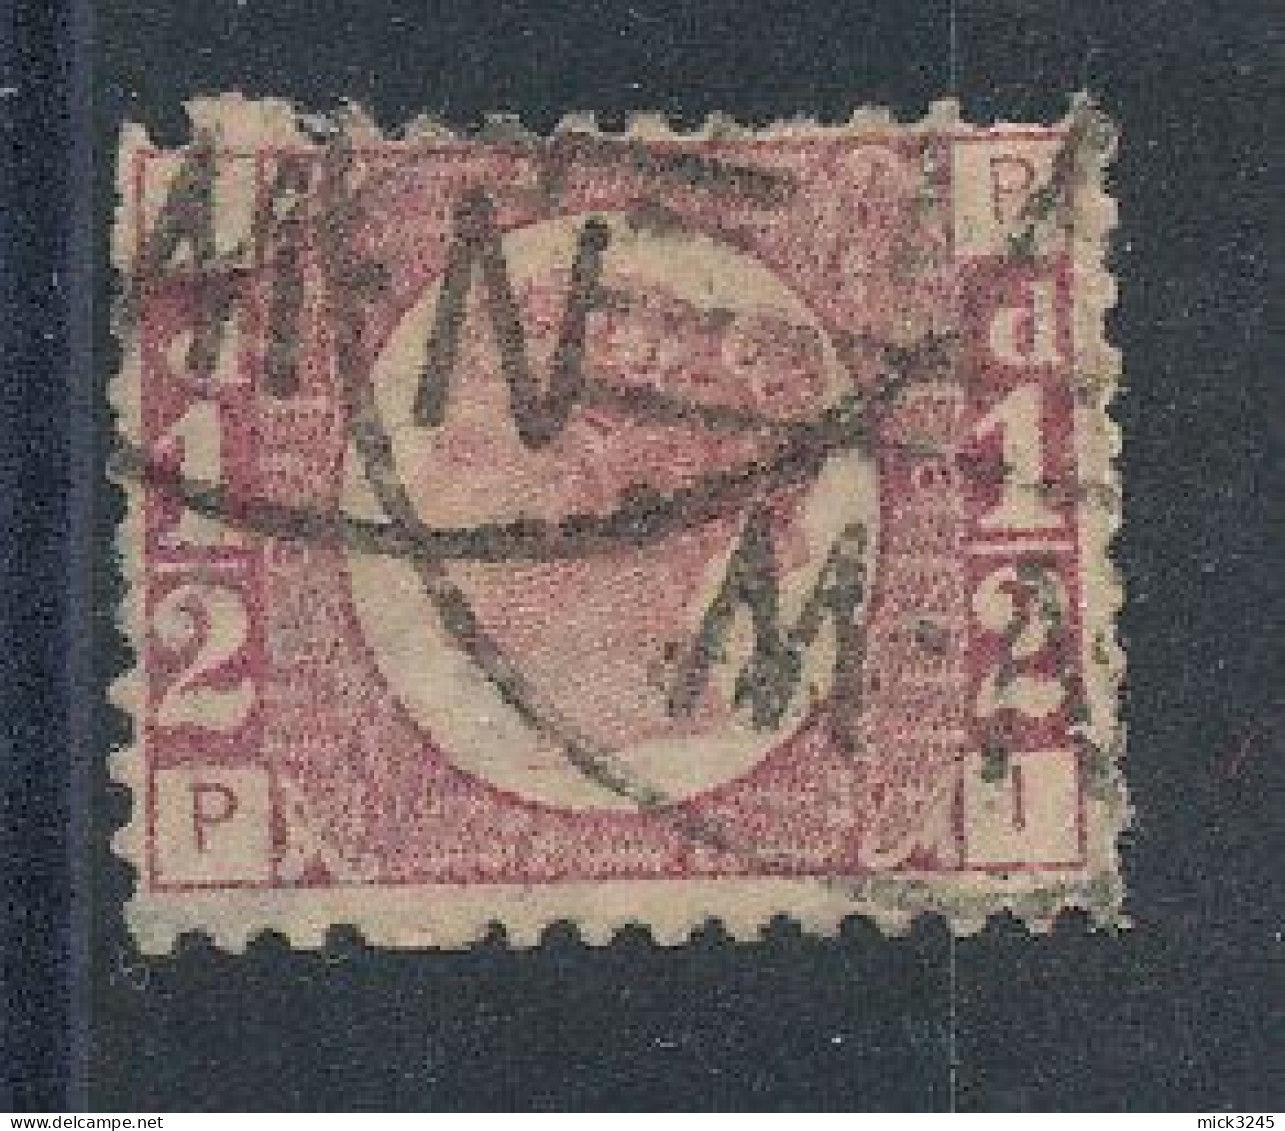 GB  N°49 Victoria 1/2p Rouge De 1870 Planche 6 - Used Stamps